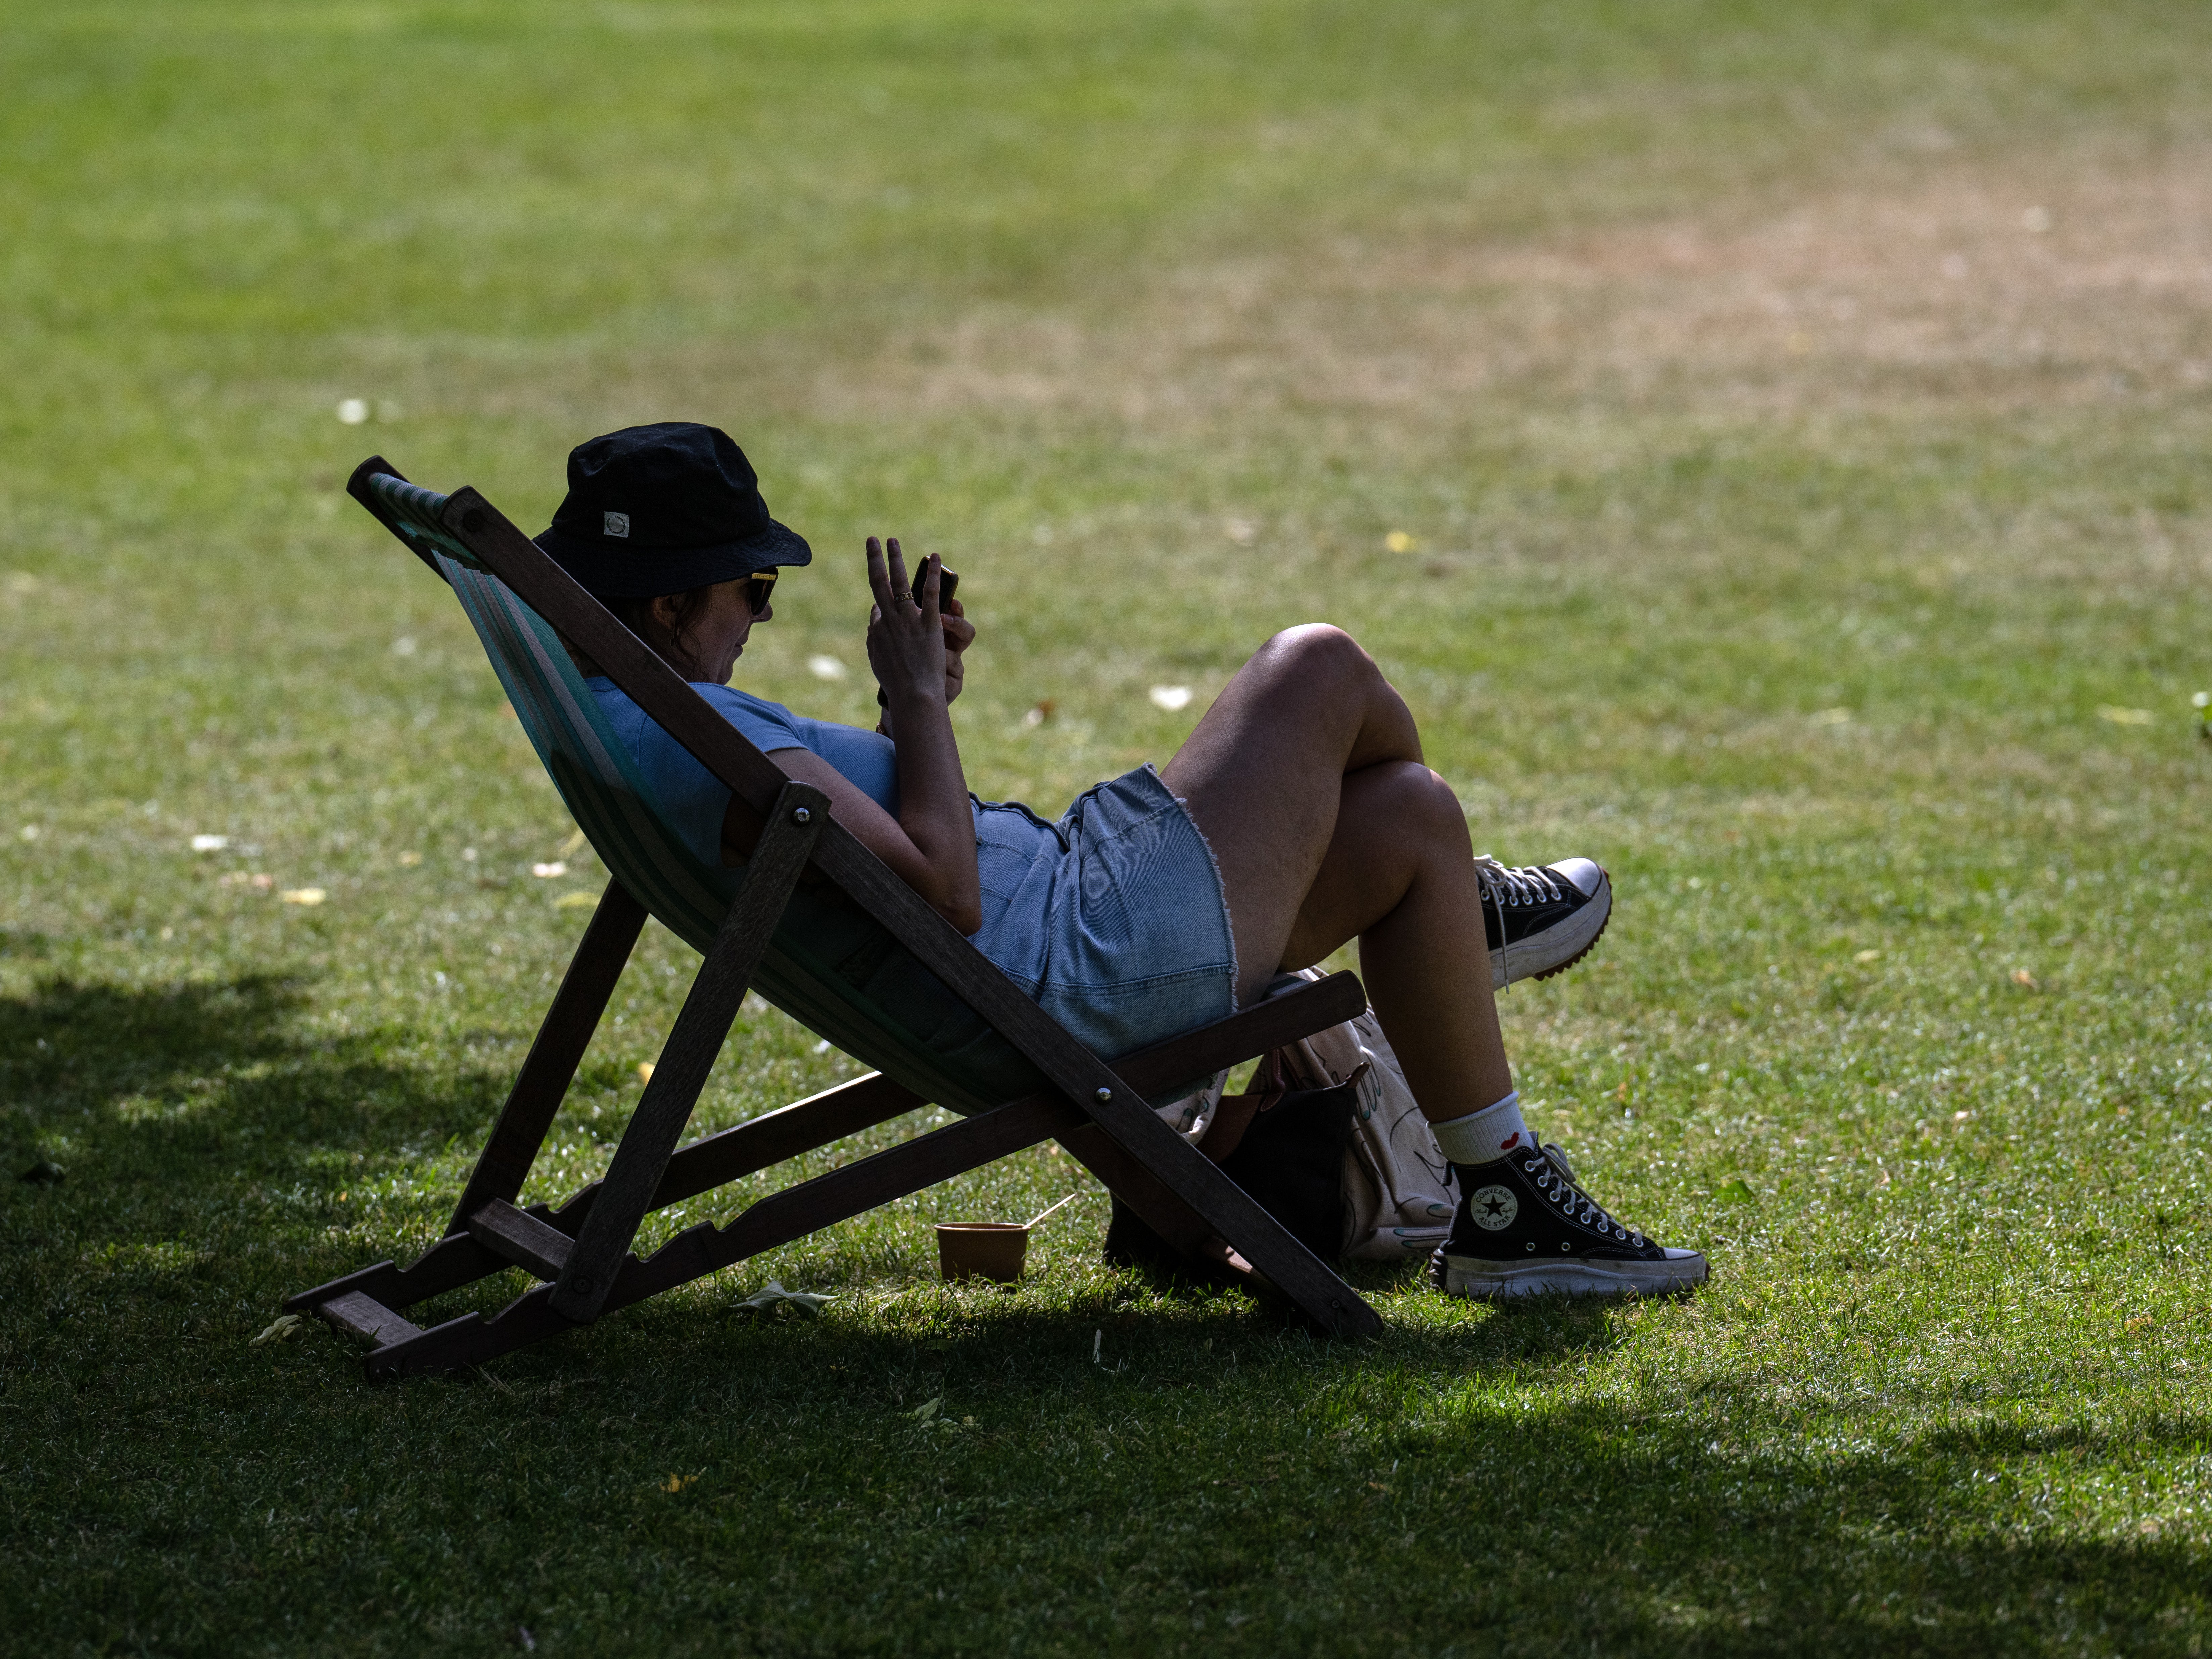 Temperatures could fall by up to 15C after the UK’s heatwave